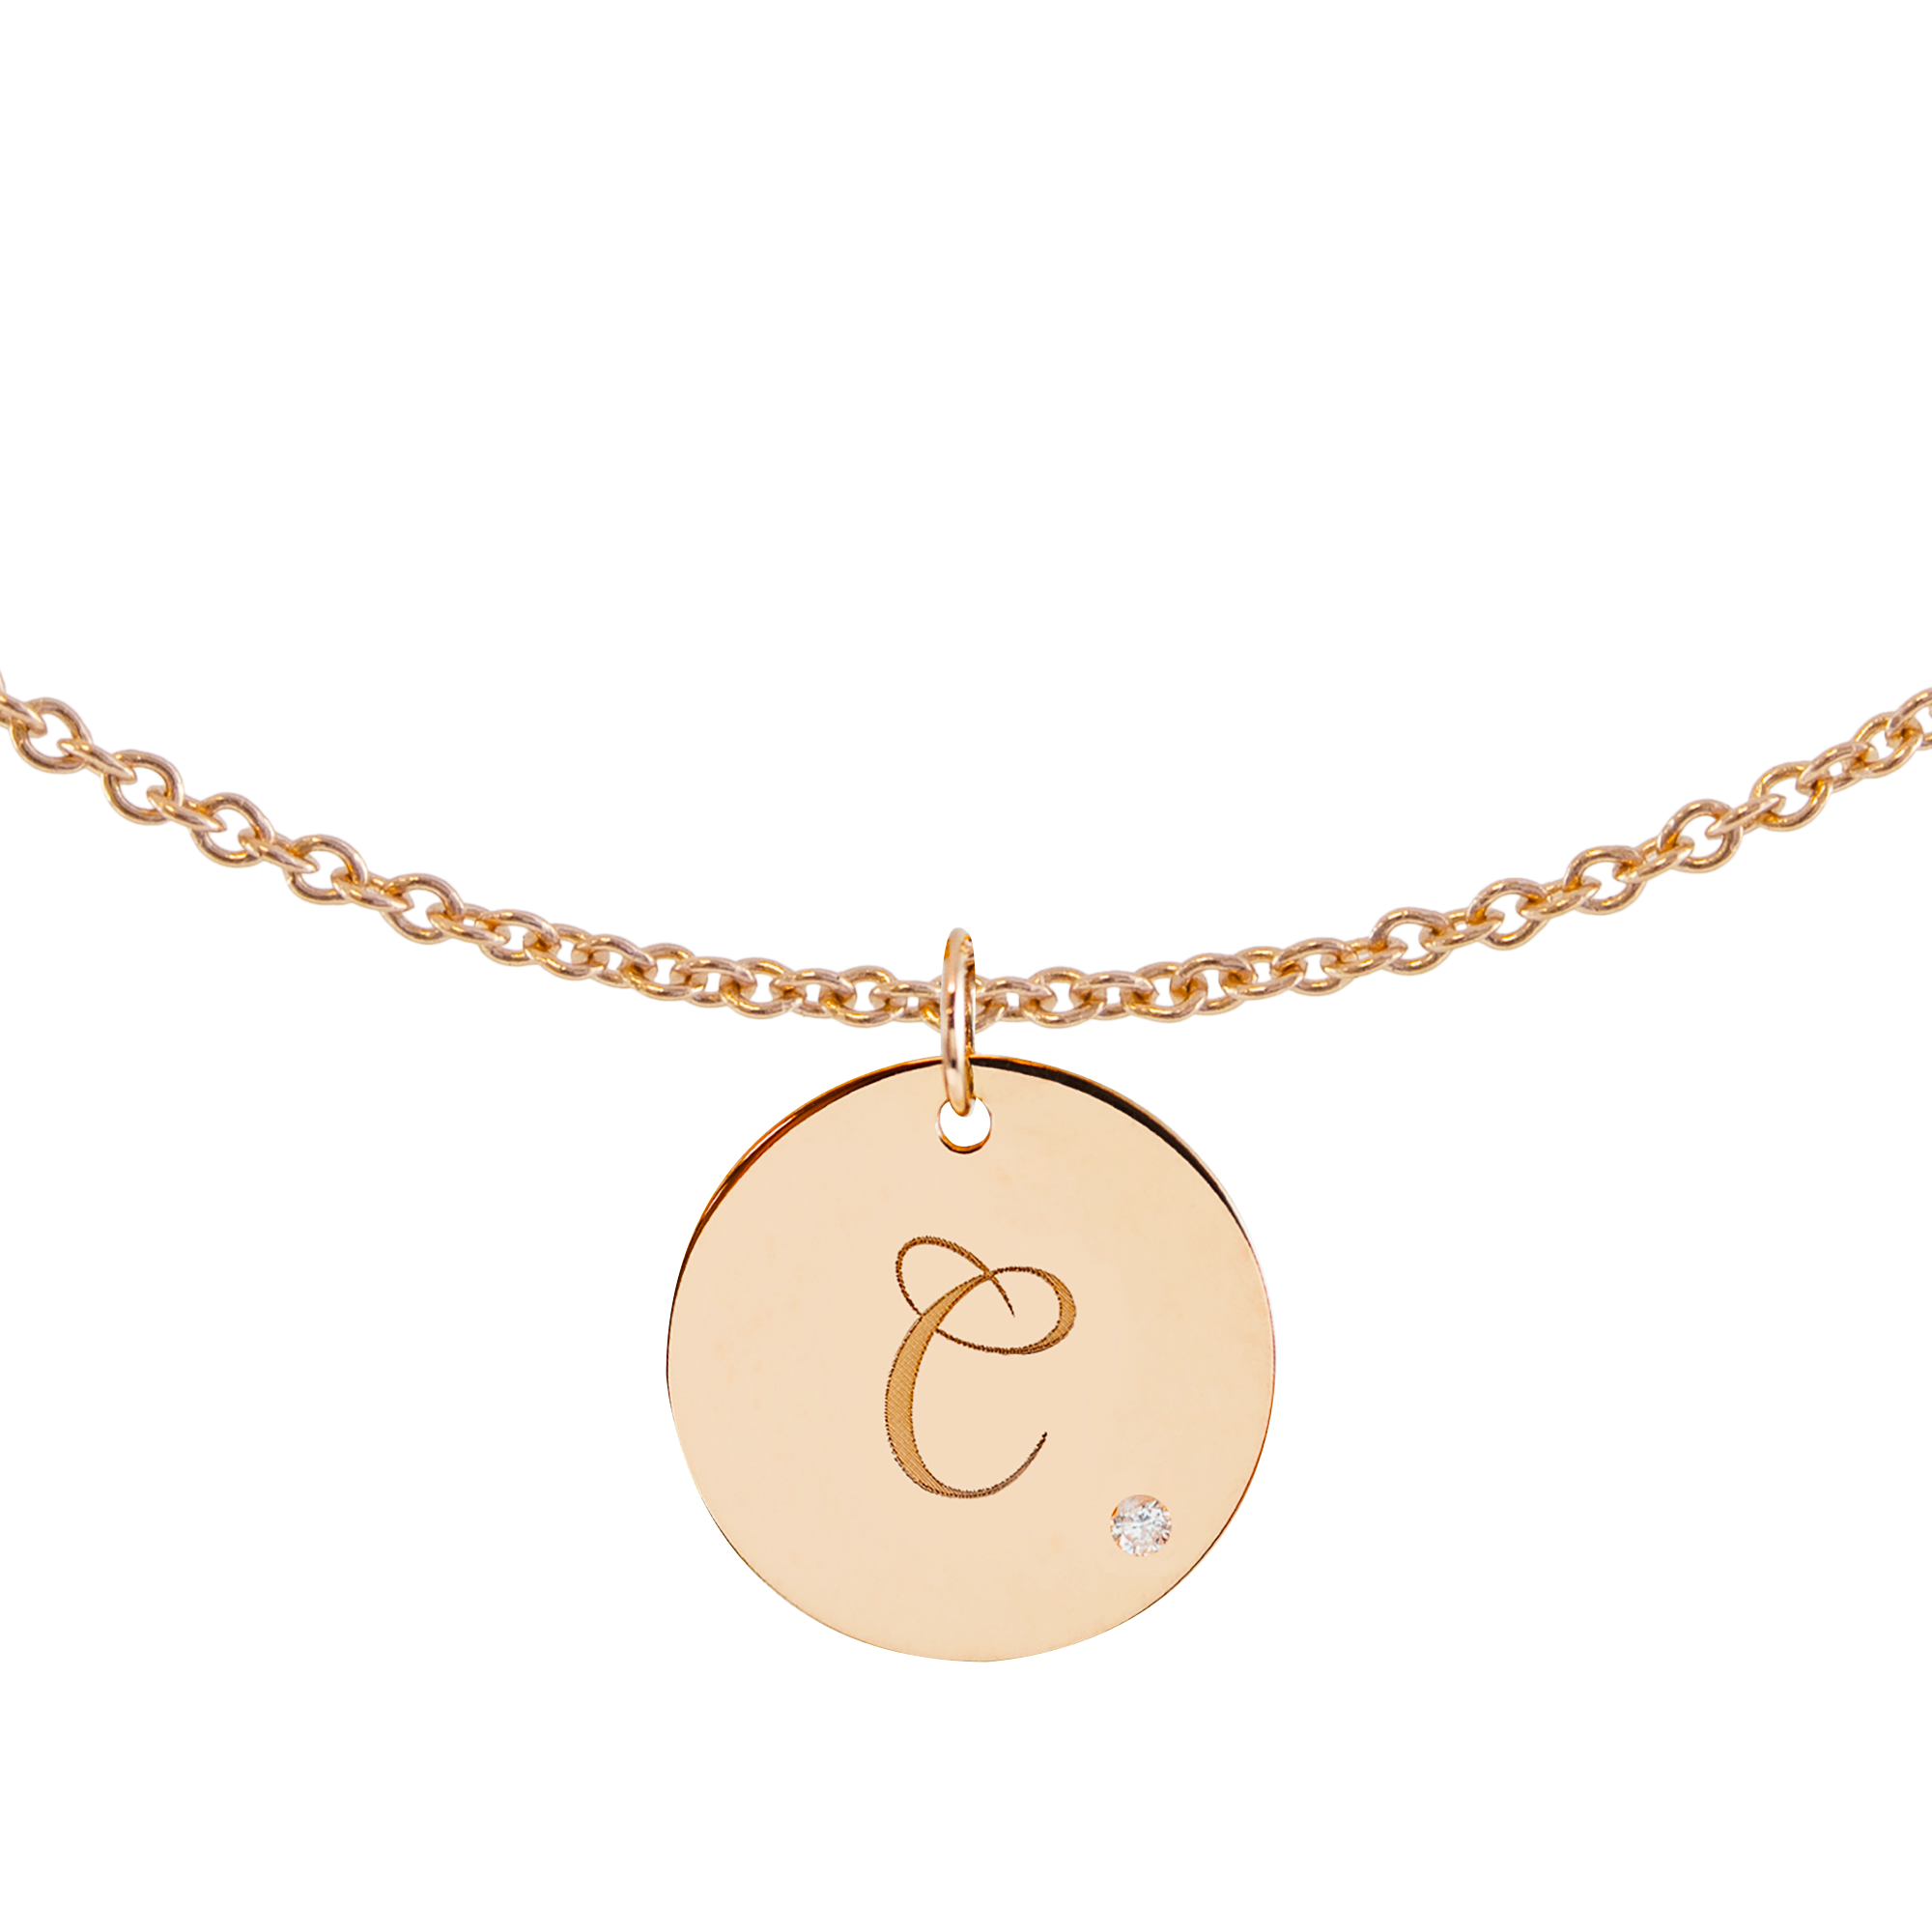 Personalized English initial pendant